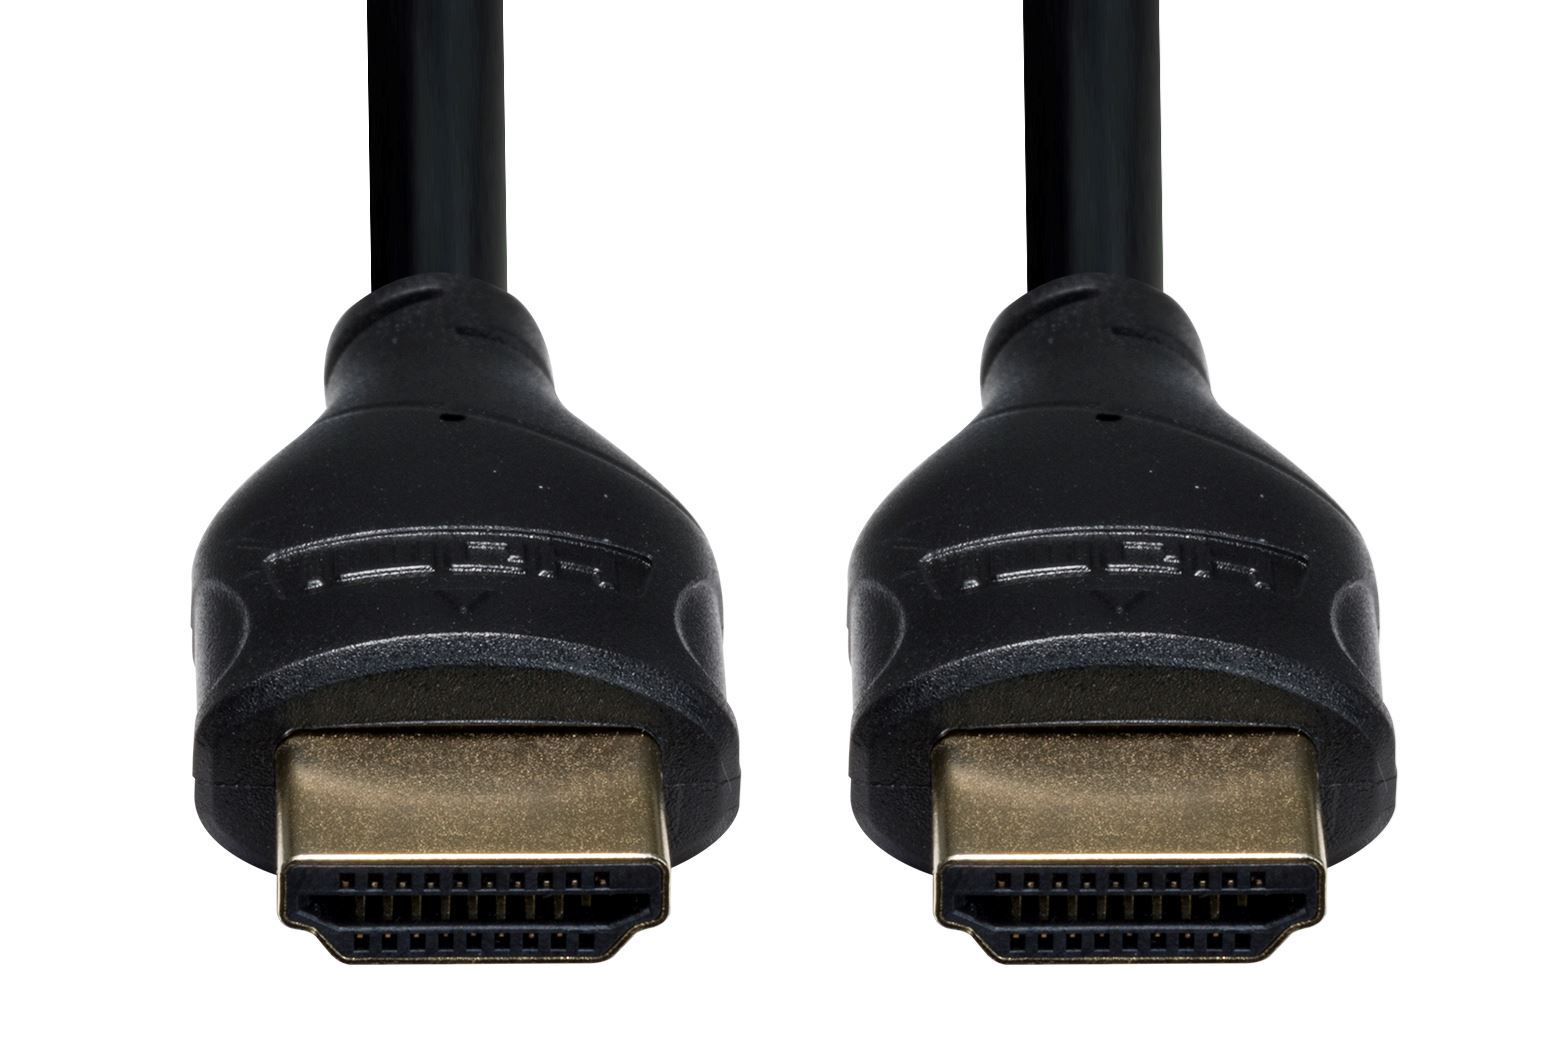 DYNAMIX_0.5m_HDMI_10Gbs_Slimline_High-Speed_Cable_with_Ethernet._Max_Res:_4K2K@24/30Hz_(3840x2160)_8_Audio_channels._8bit_colour_depth._Supports_CEC,_3D,_ARC,_Ethernet. 863